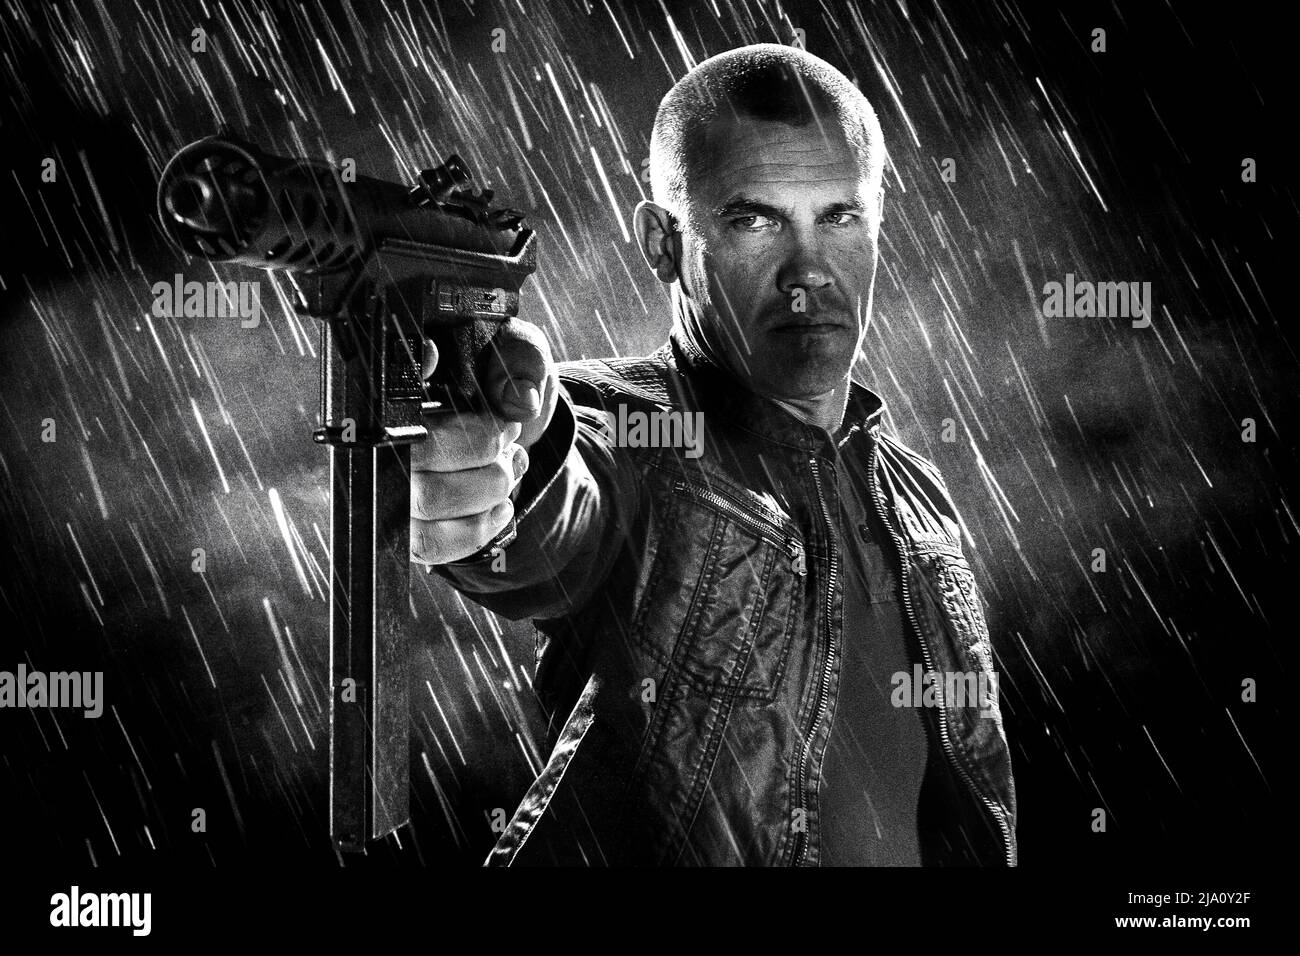 JOSH BROLIN in SIN CITY: A DAME TO KILL FOR (2014), directed by ROBERT RODRIGUEZ and FRANK MILLER. Credit: MIRAMAX FILMS / Album Stock Photo